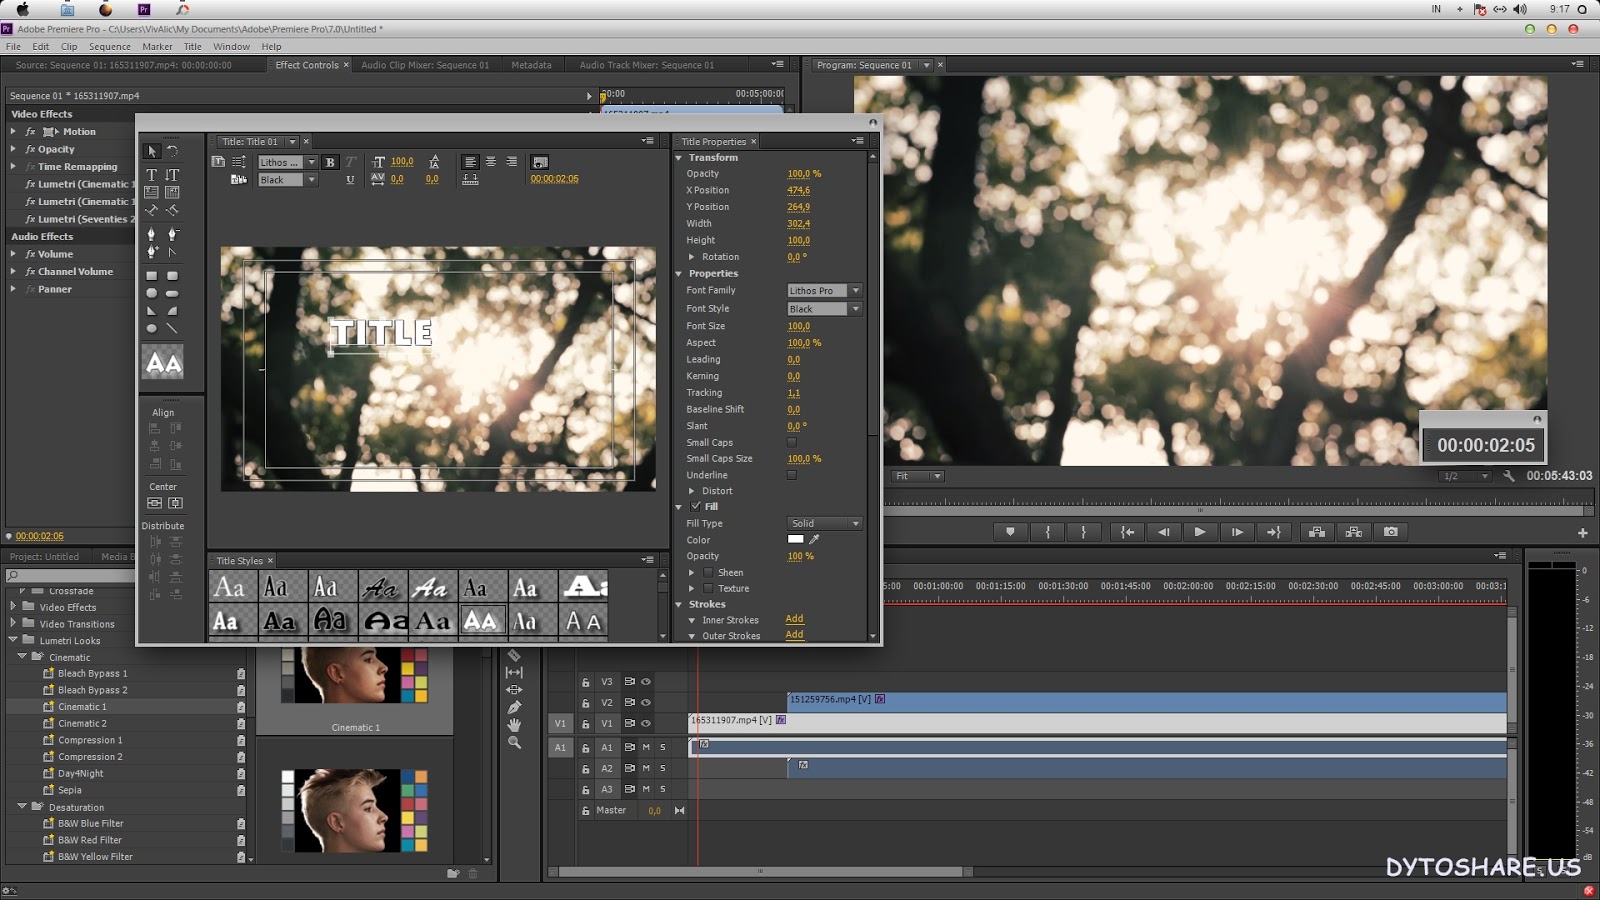 Latest Adobe Premiere Pro Cs6 Free Download Full Version For Windows 8 64 Bit - And Full Version